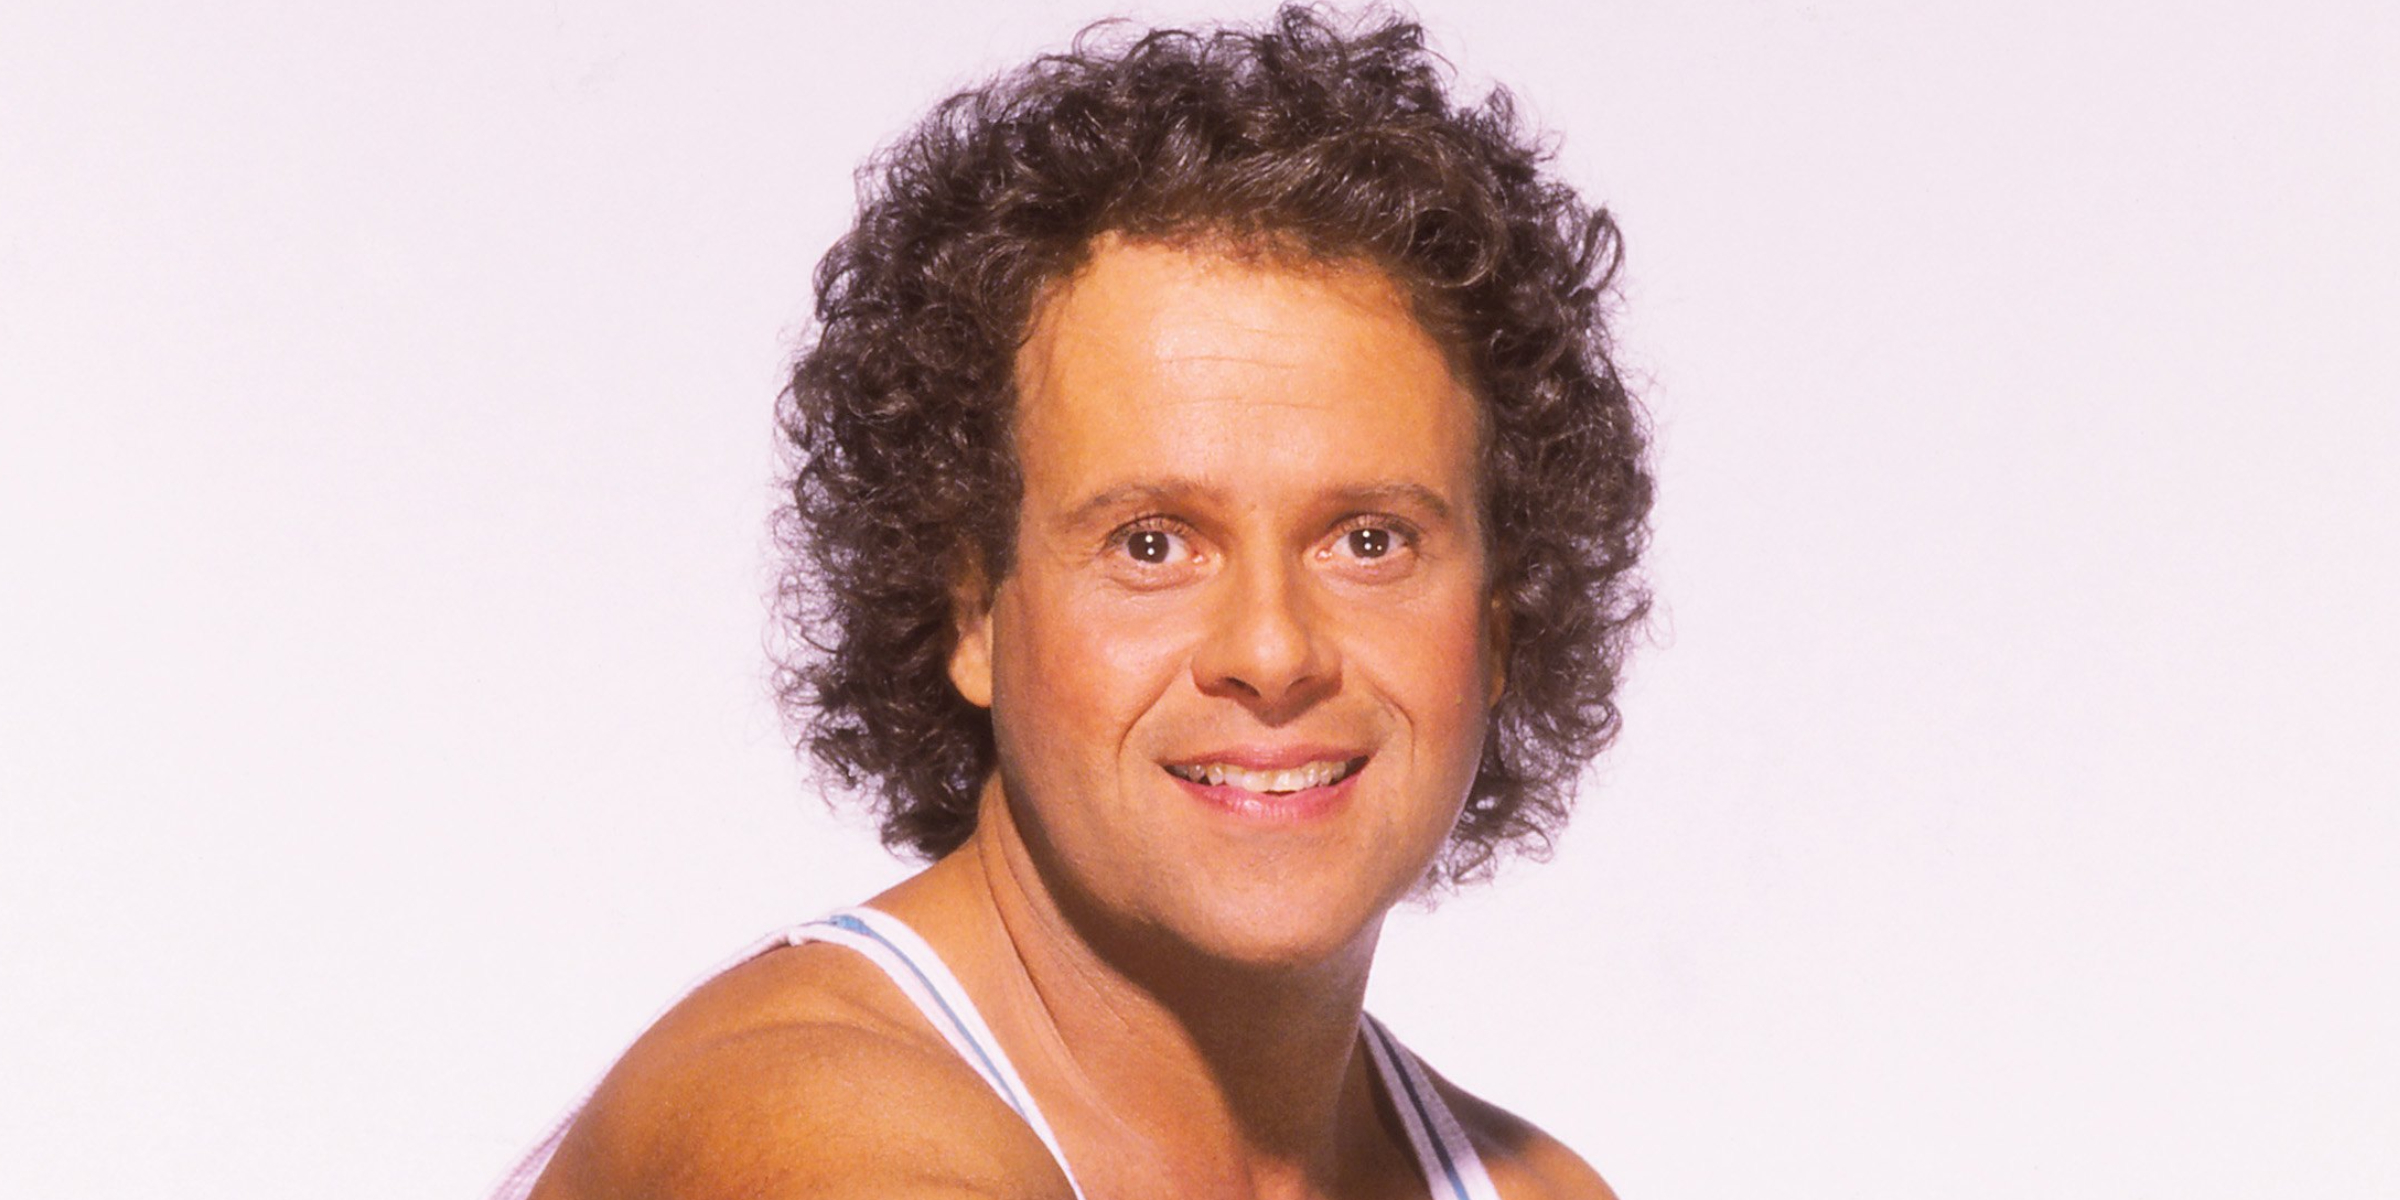 Richard Simmons | Quelle: Getty Images